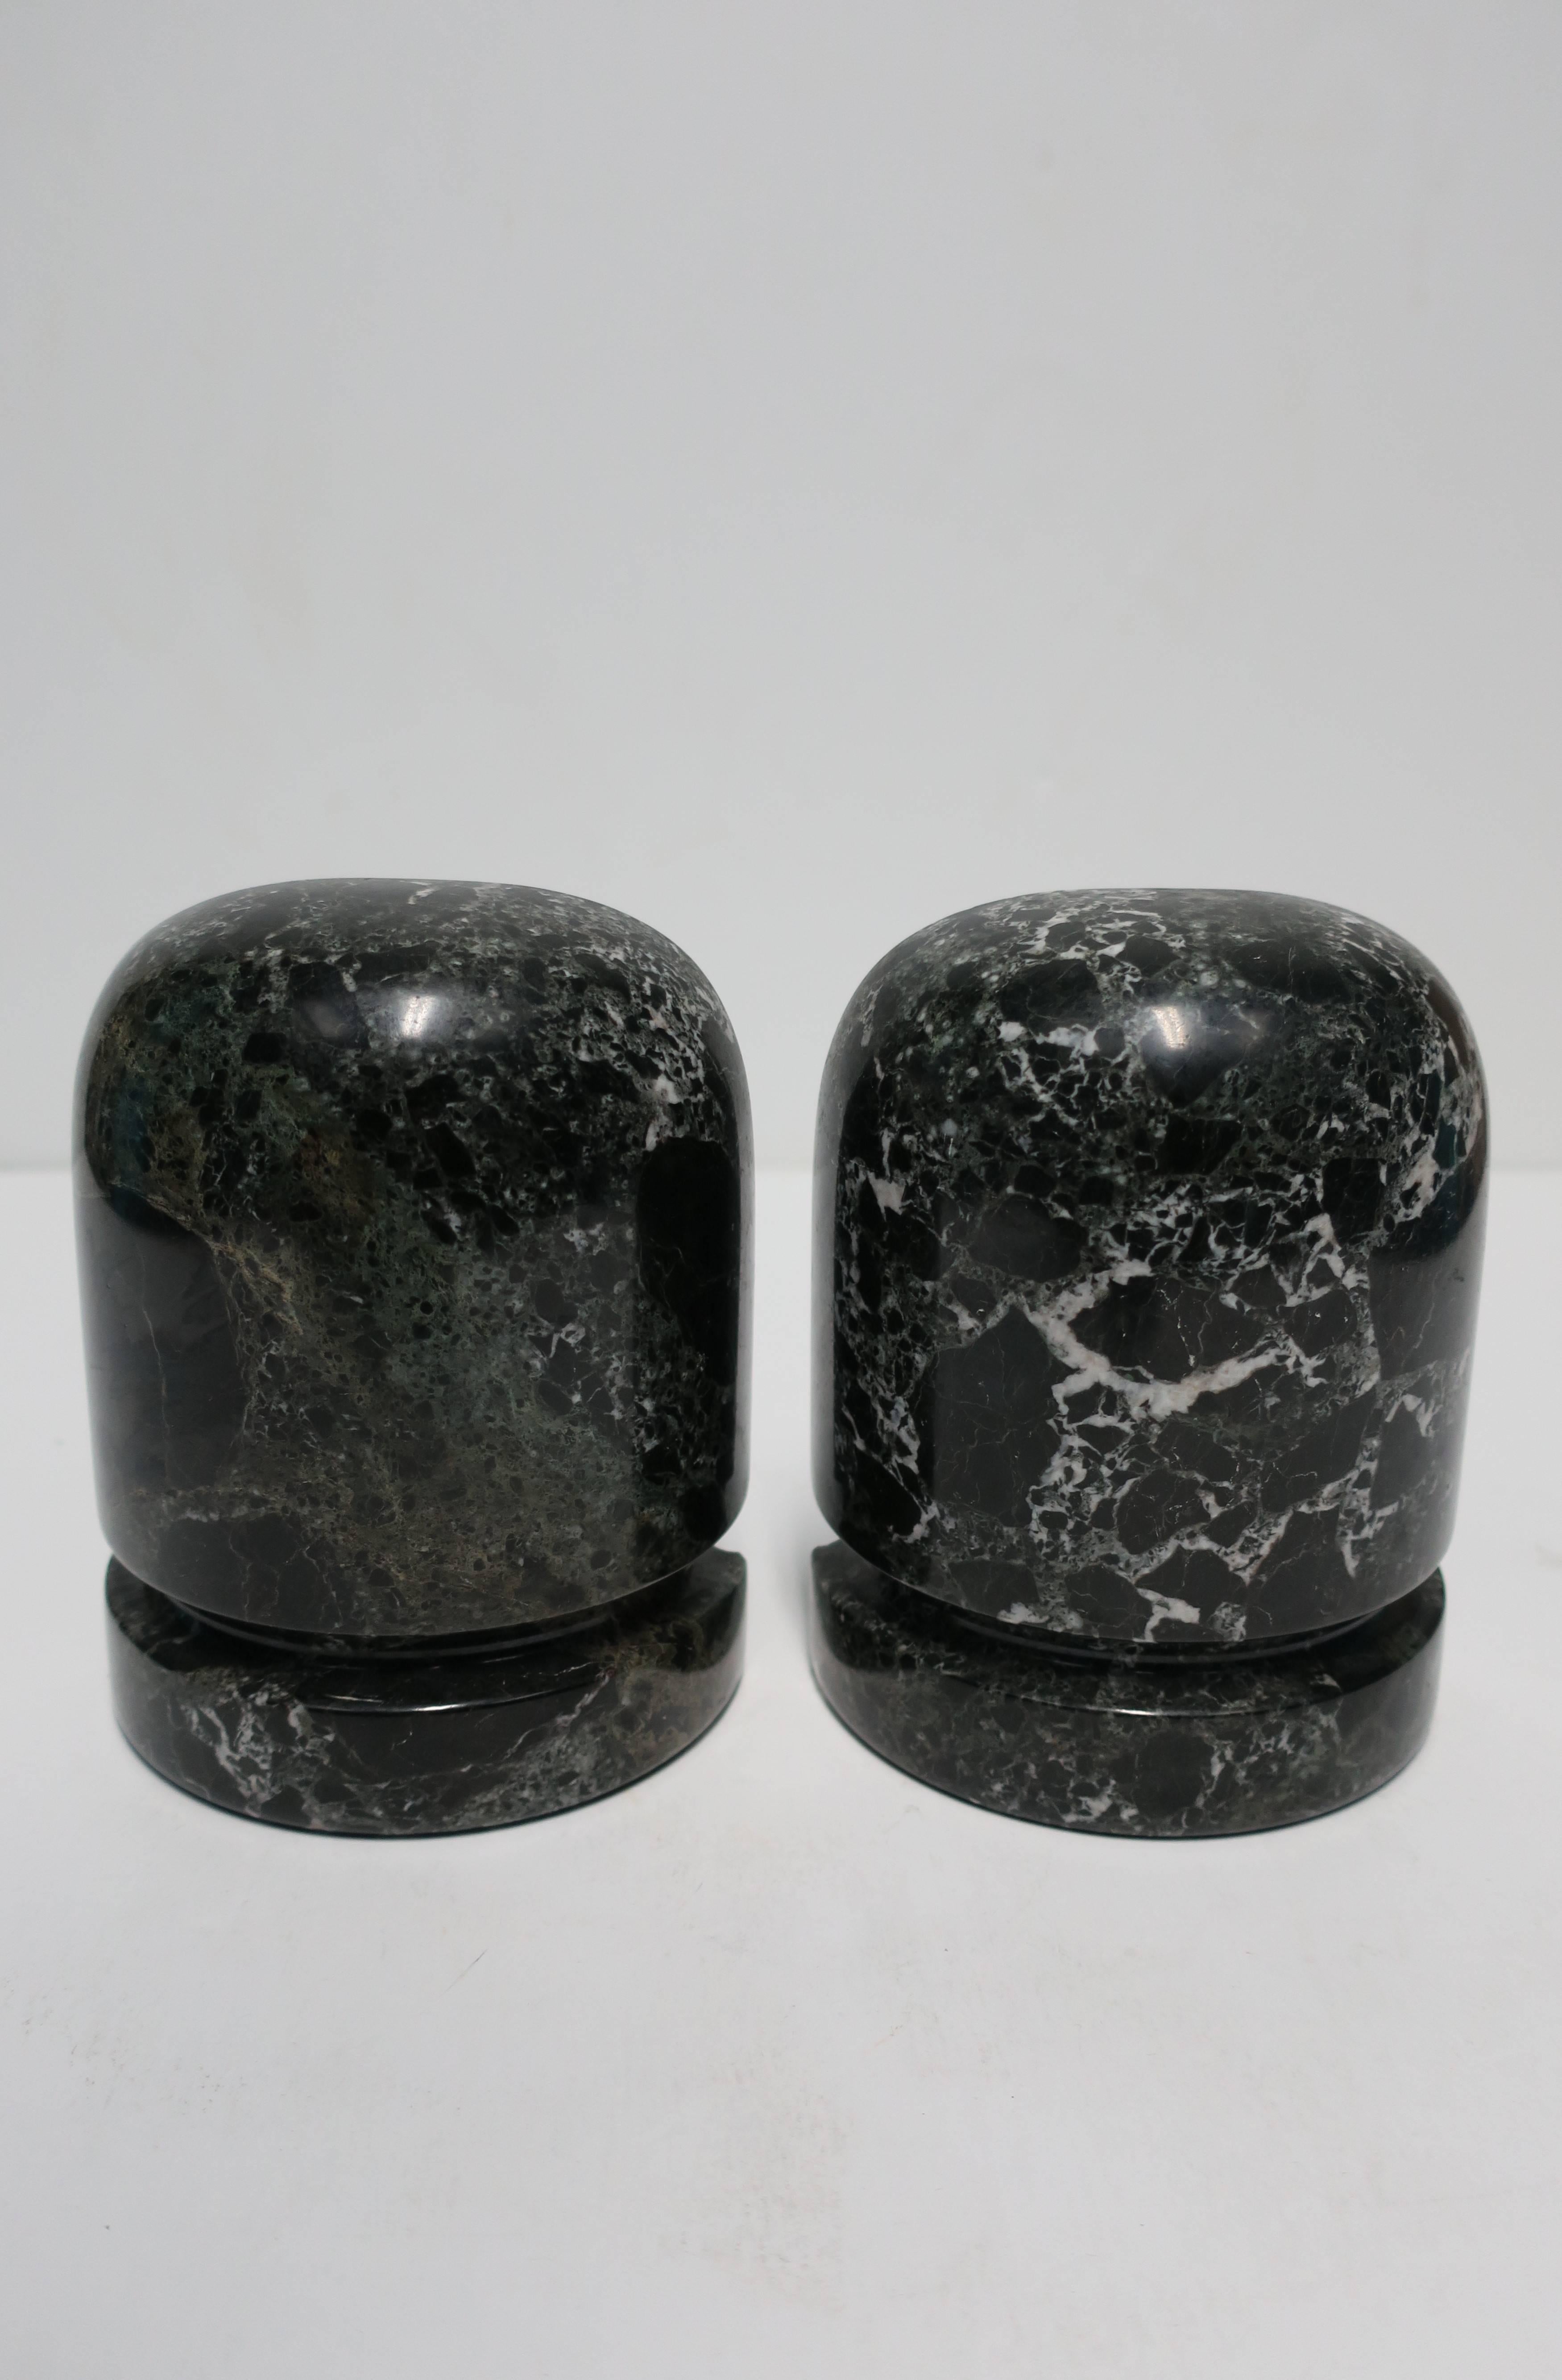 Pair/set available here for $450
A vintage pair of black and white marble bookends. Marble is polished smooth with carved detailed at base. 

Measurements: 6 in. H x 4.75 in. W x 2 3/8 in. D. 

Pair available here online. By request, pair can be